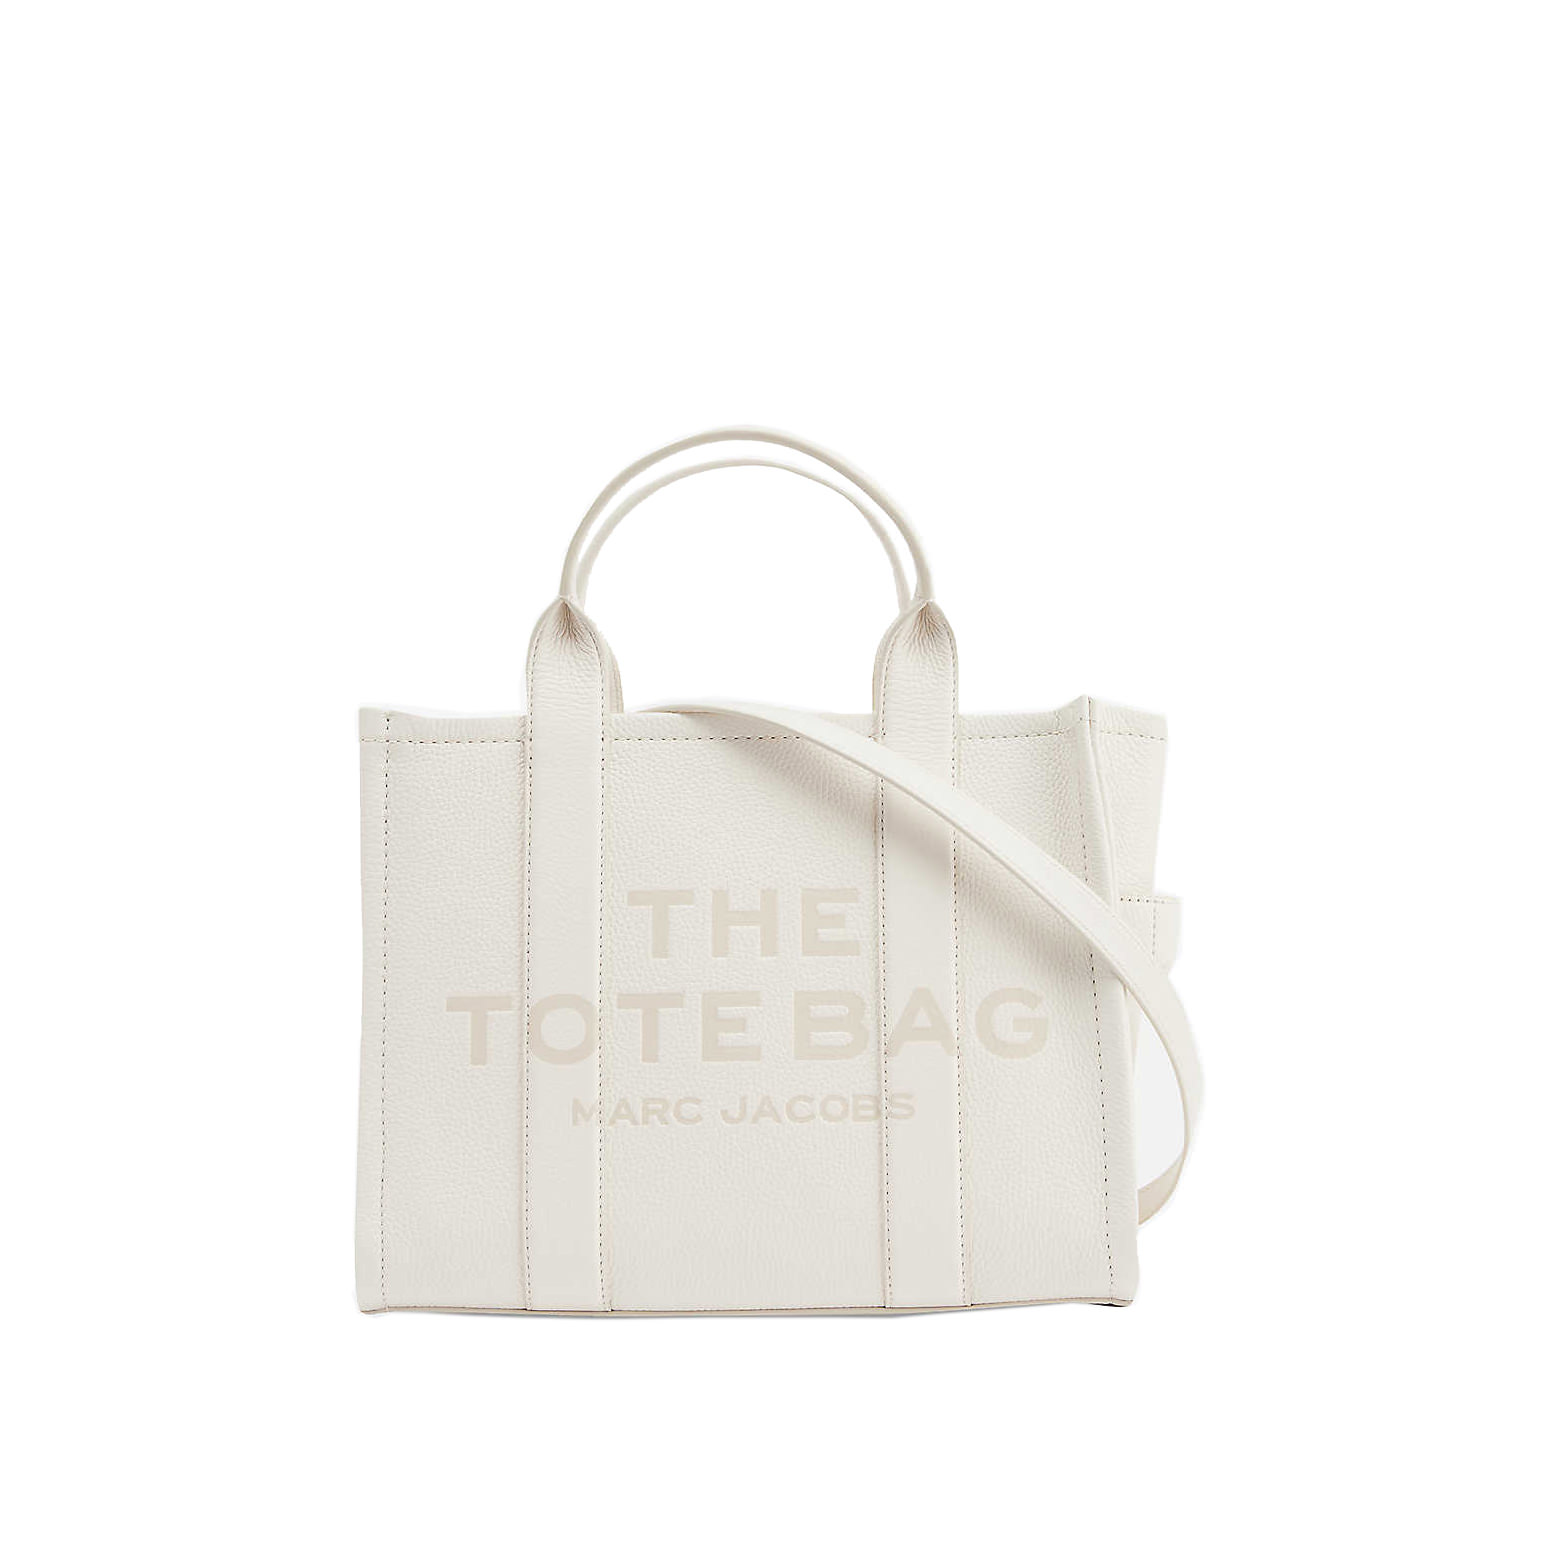 The Tote small leather tote bag